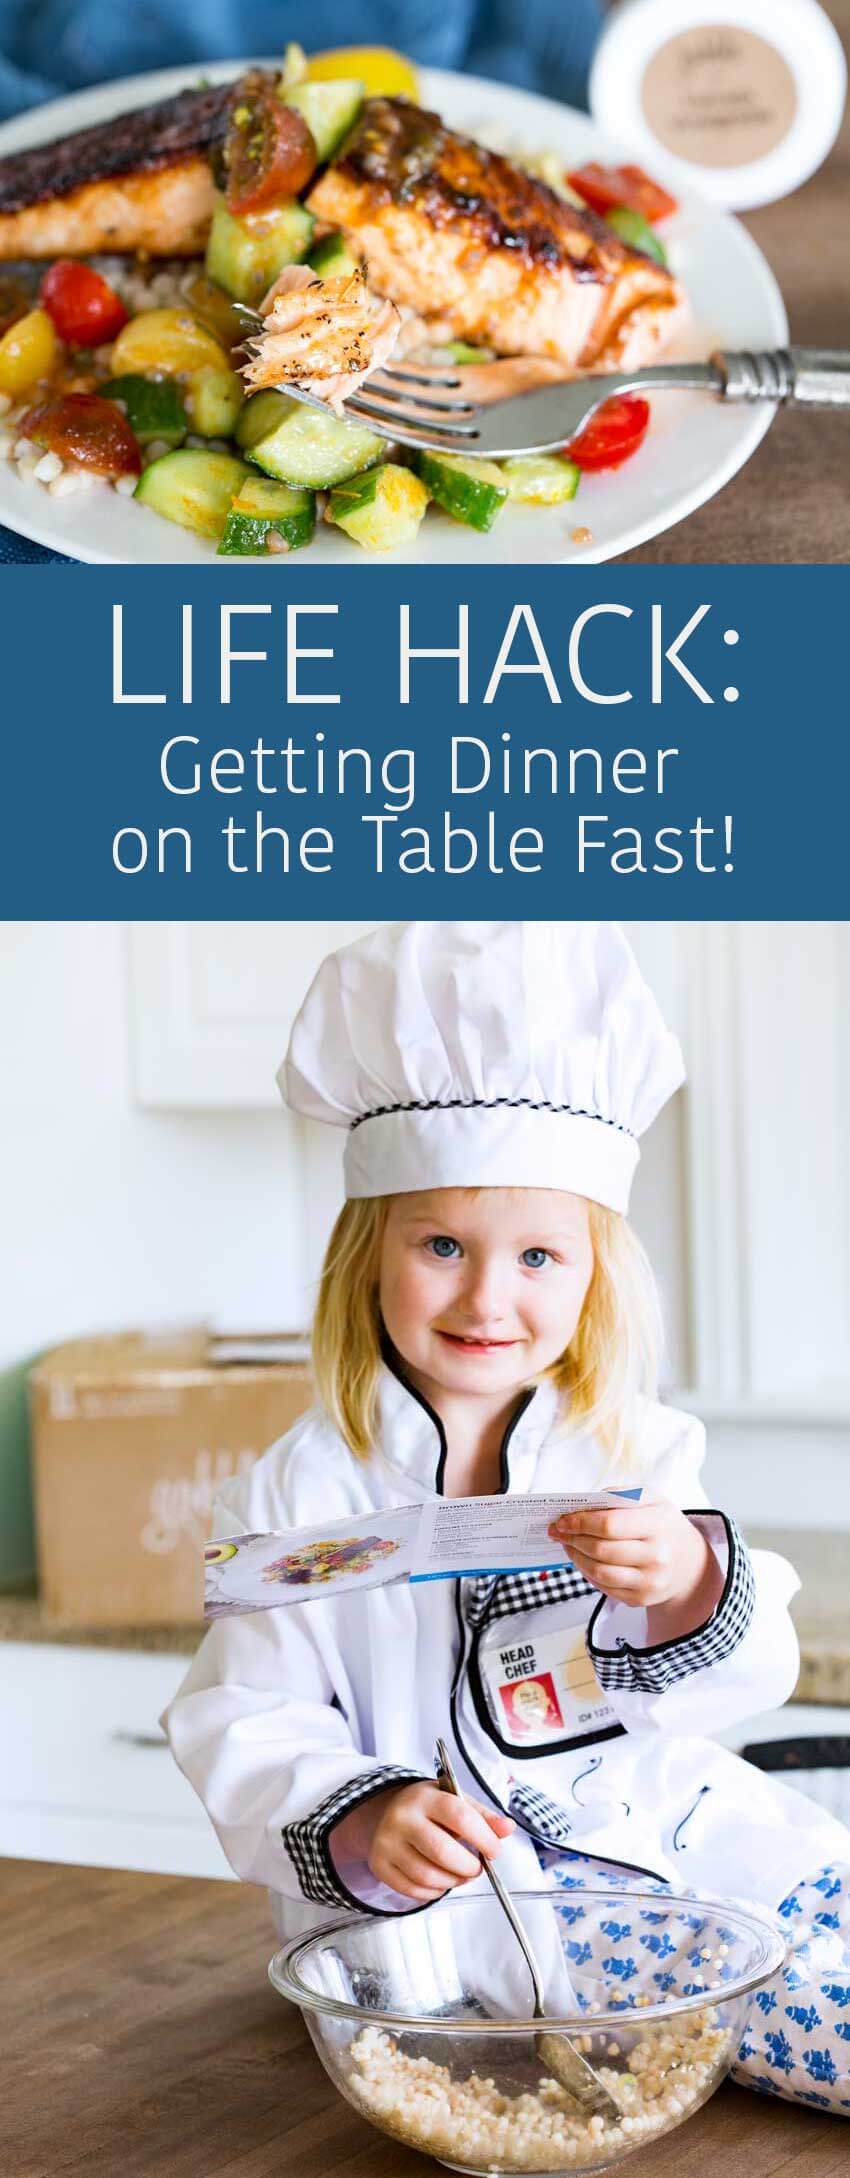 Life hacks, how to get dinner on the table fast